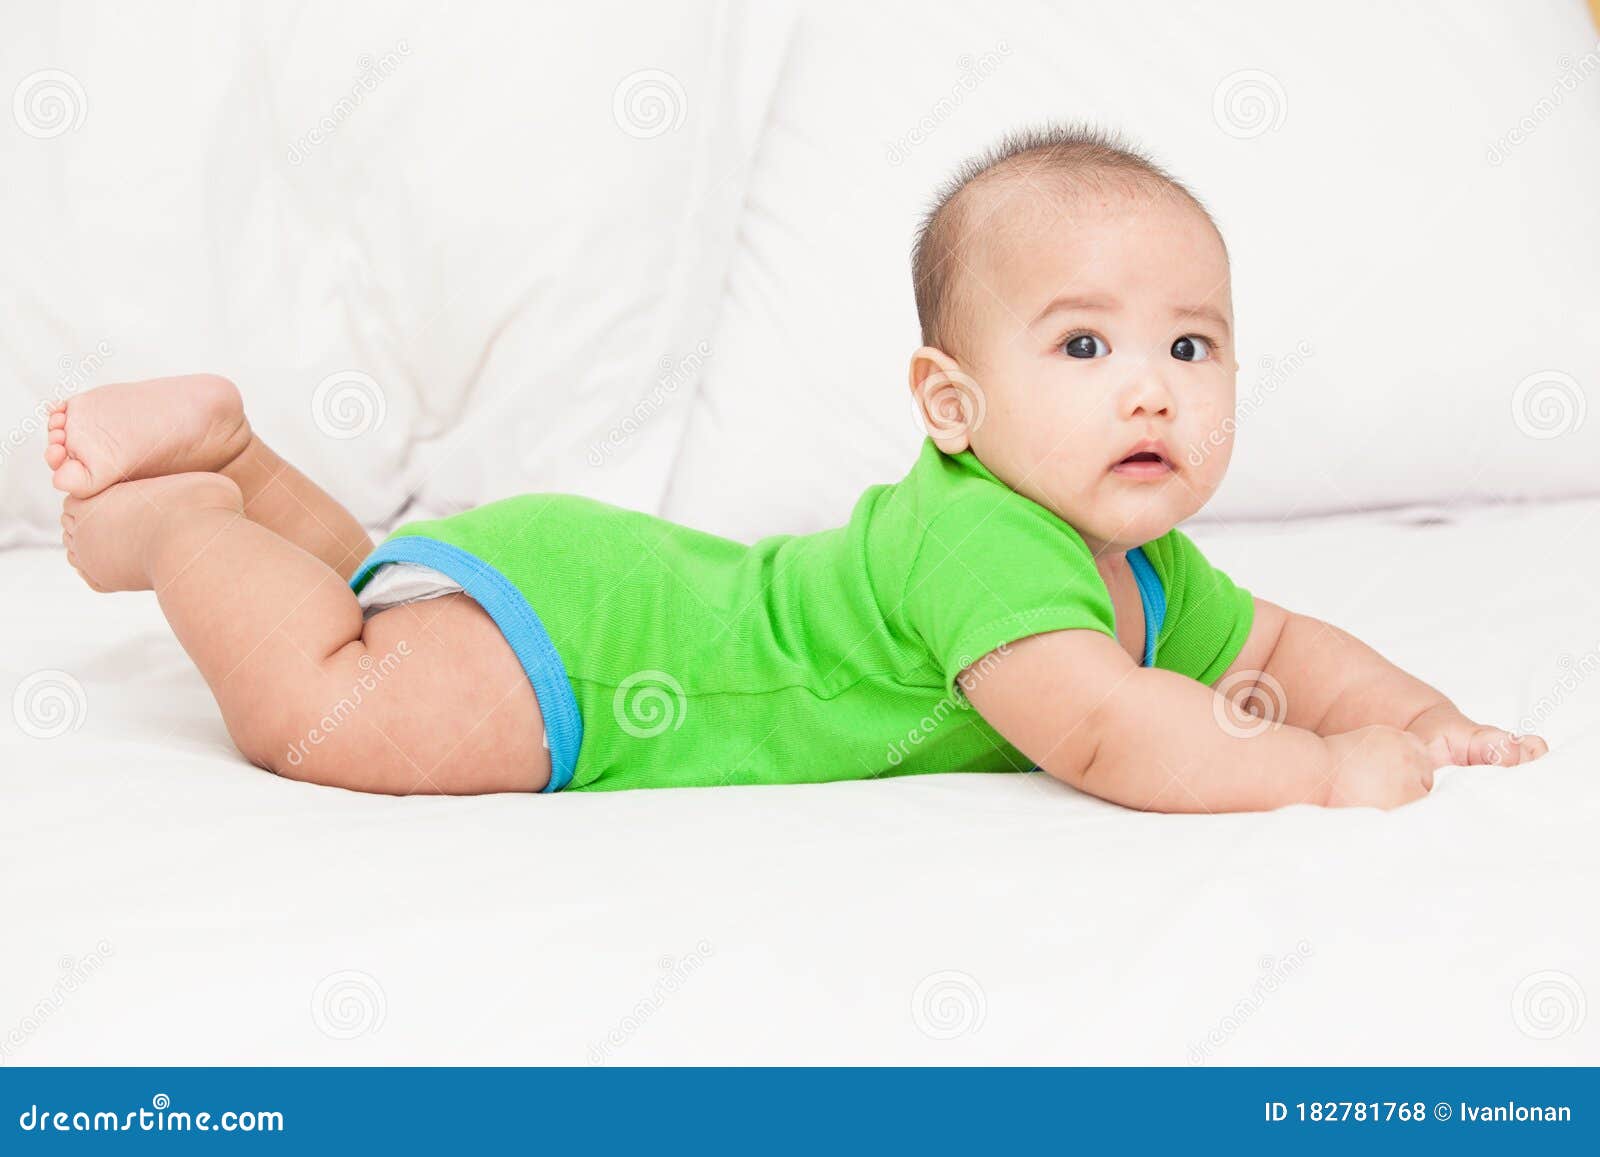 Cute Baby Smile To the Camera Stock Photo - Image of friendly ...